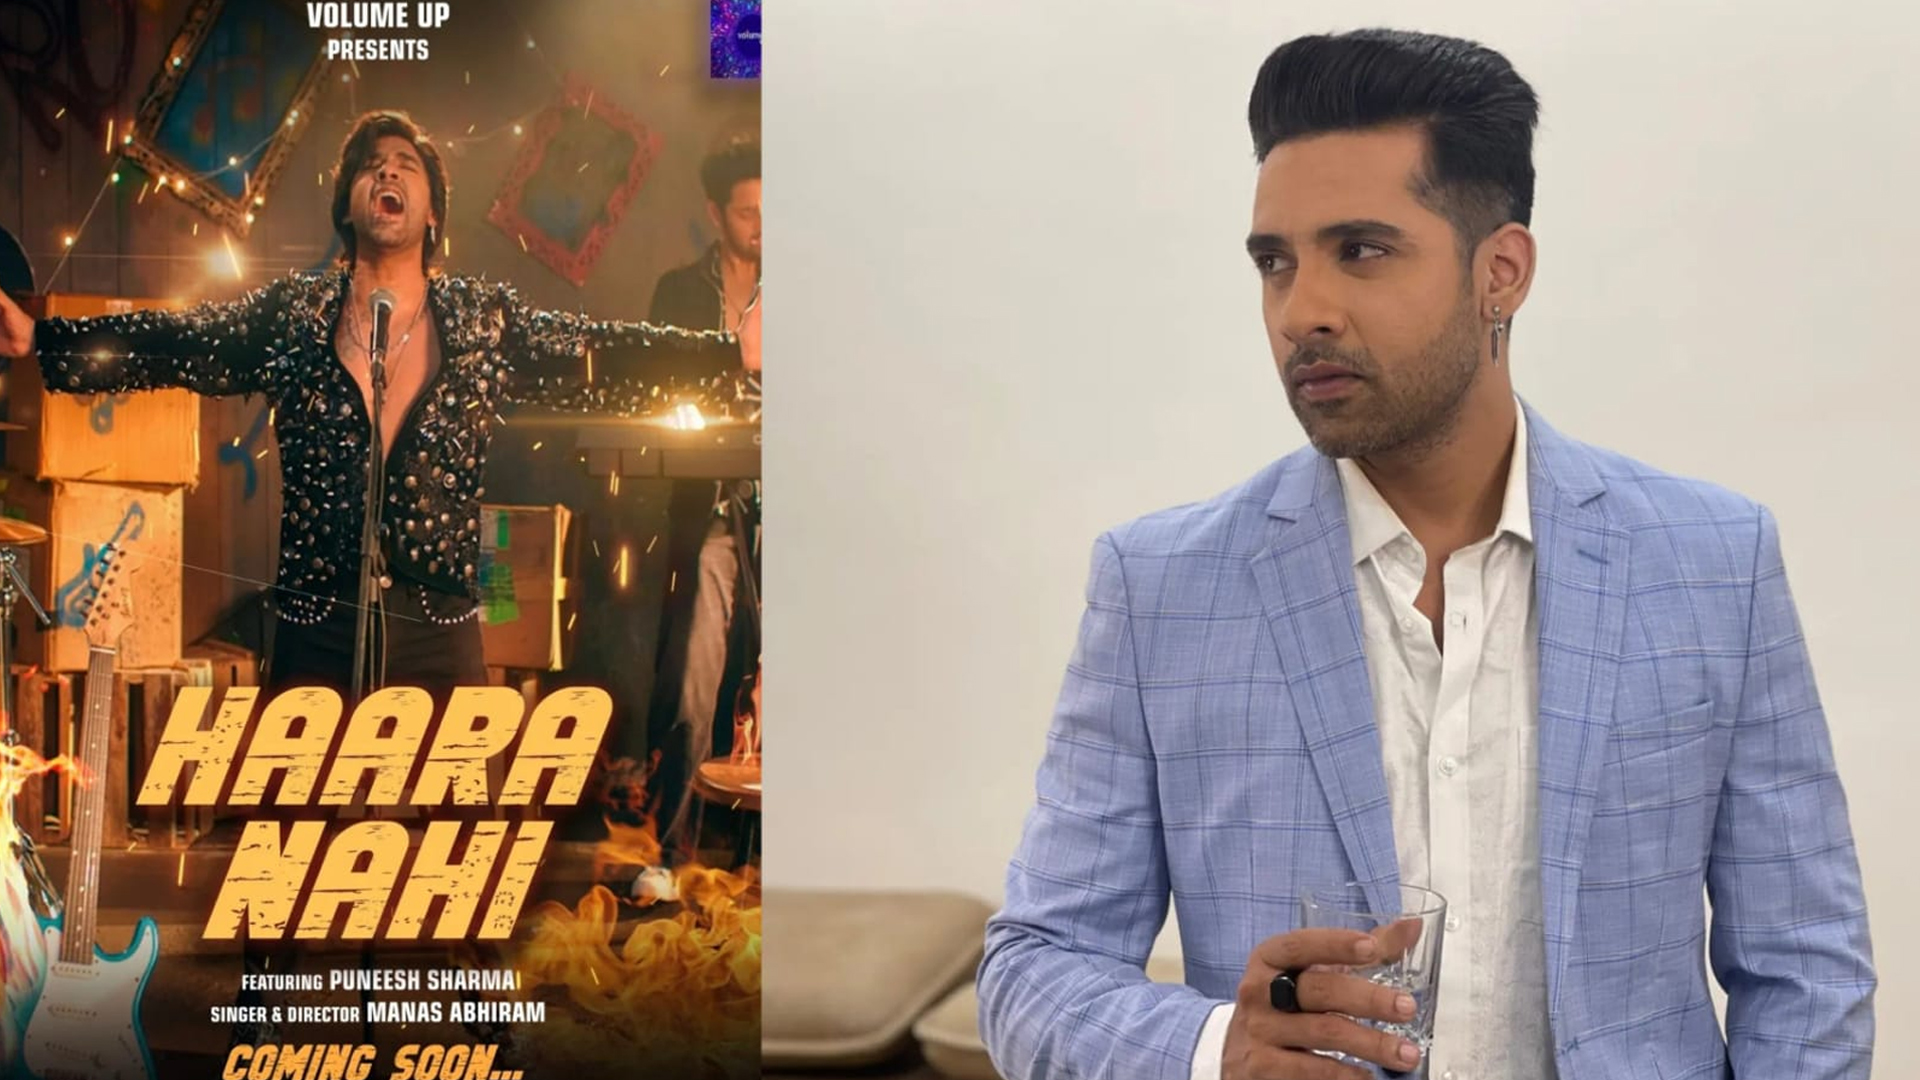 Puneesh Sharma, of Bigg Boss 11 fame, REVEALS poster of his new song Haara Nahi, says ‘I’ve poured my heart and soul into it’